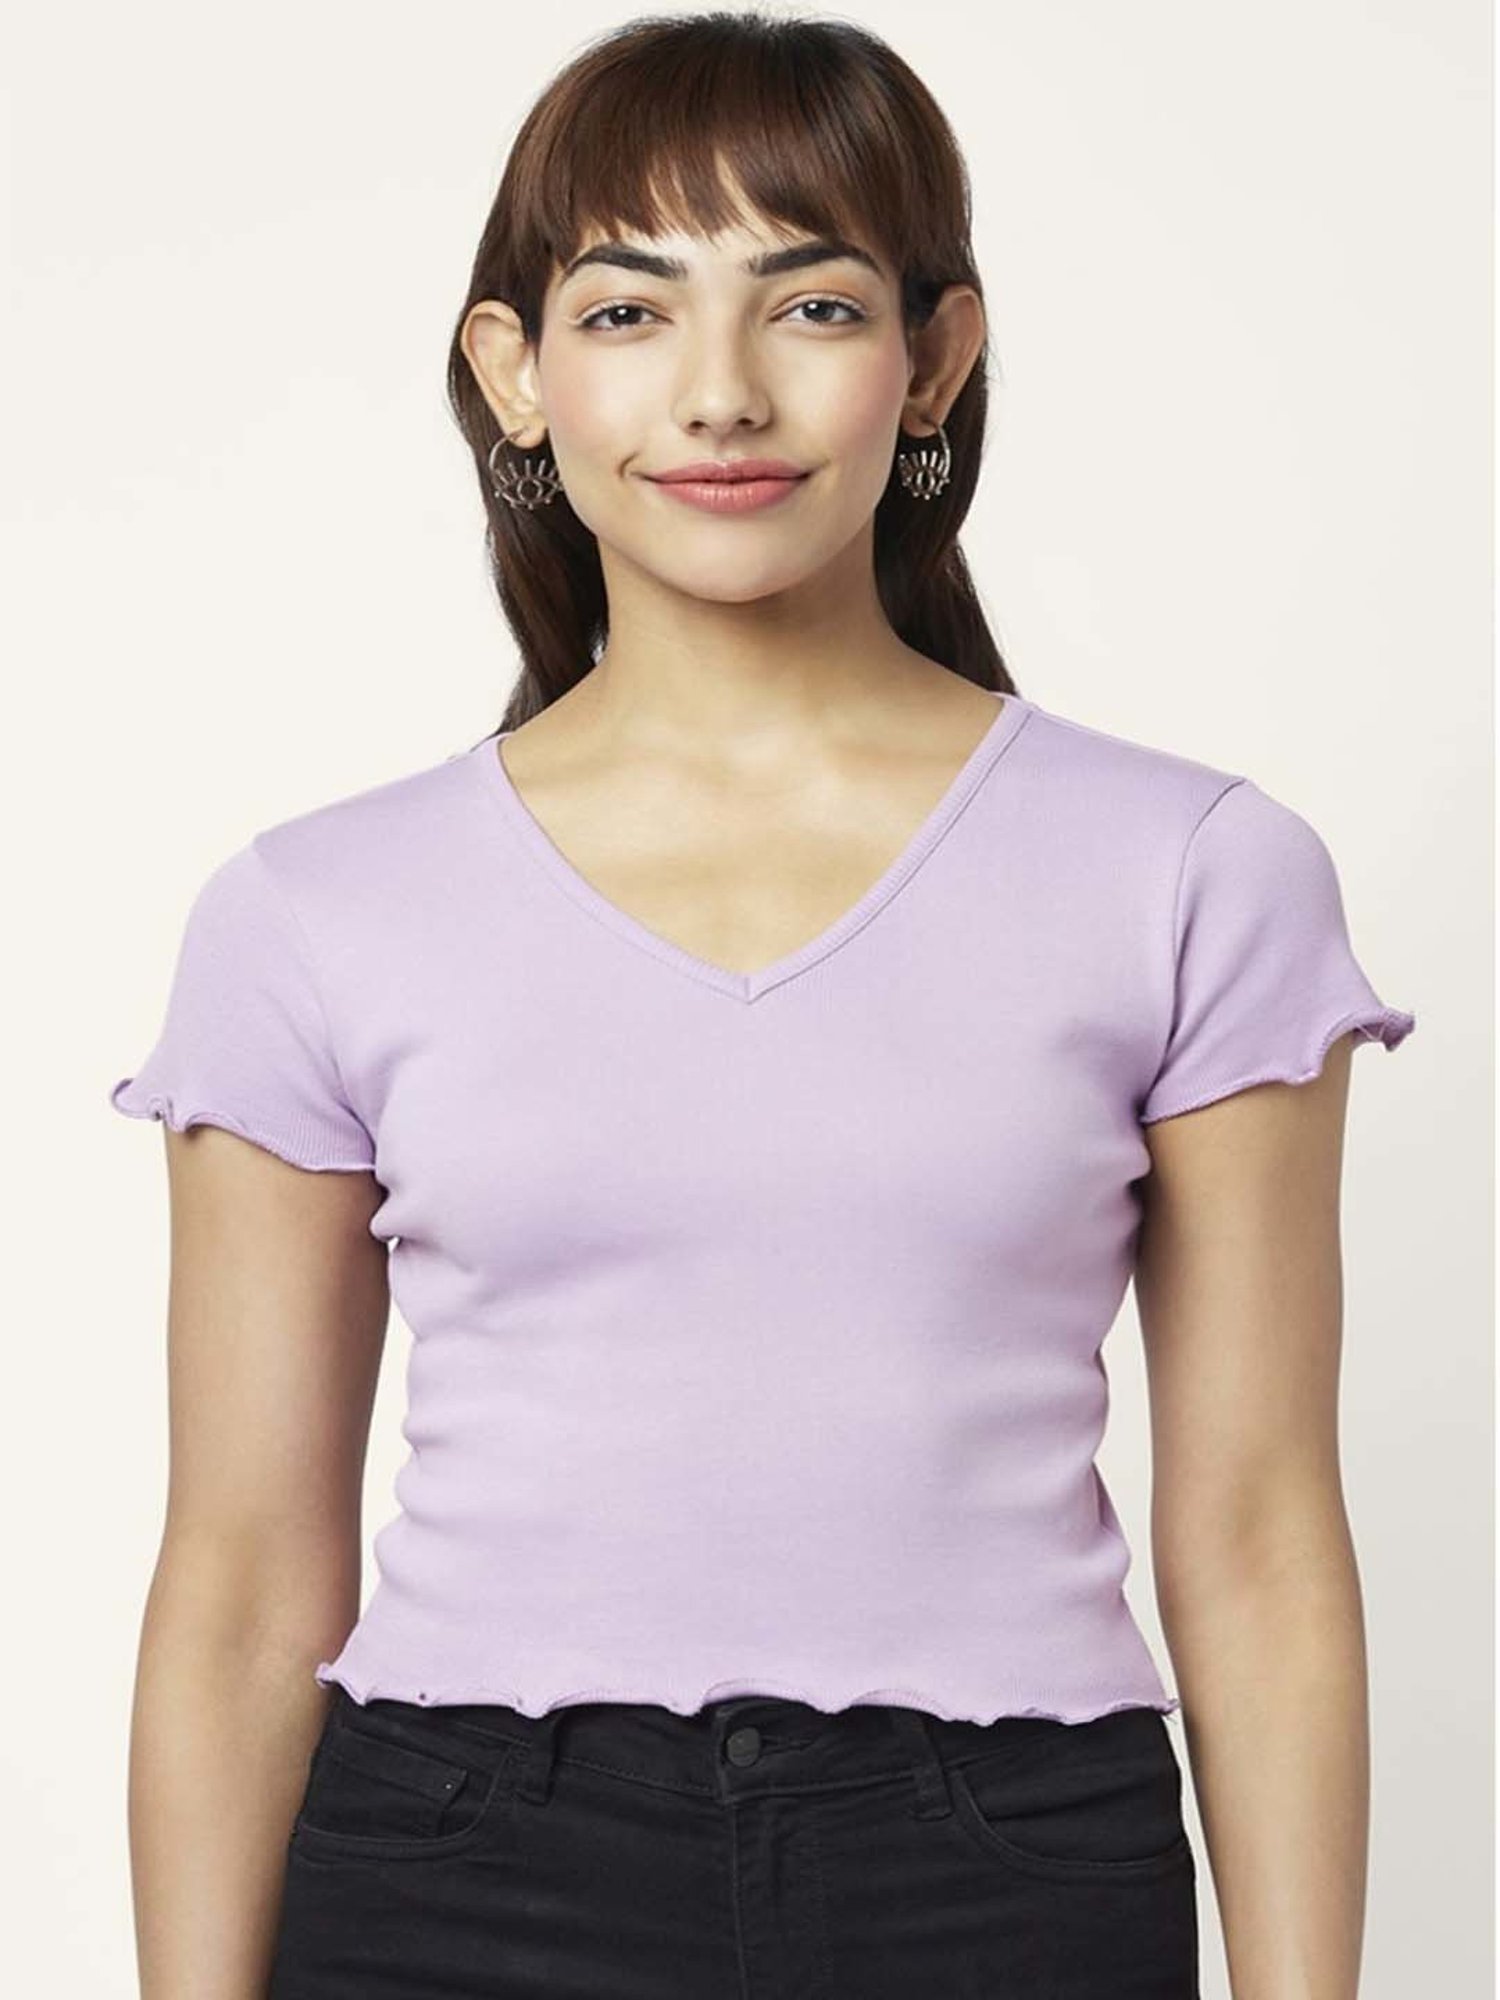 People by Pantaloons Pink Cotton Top